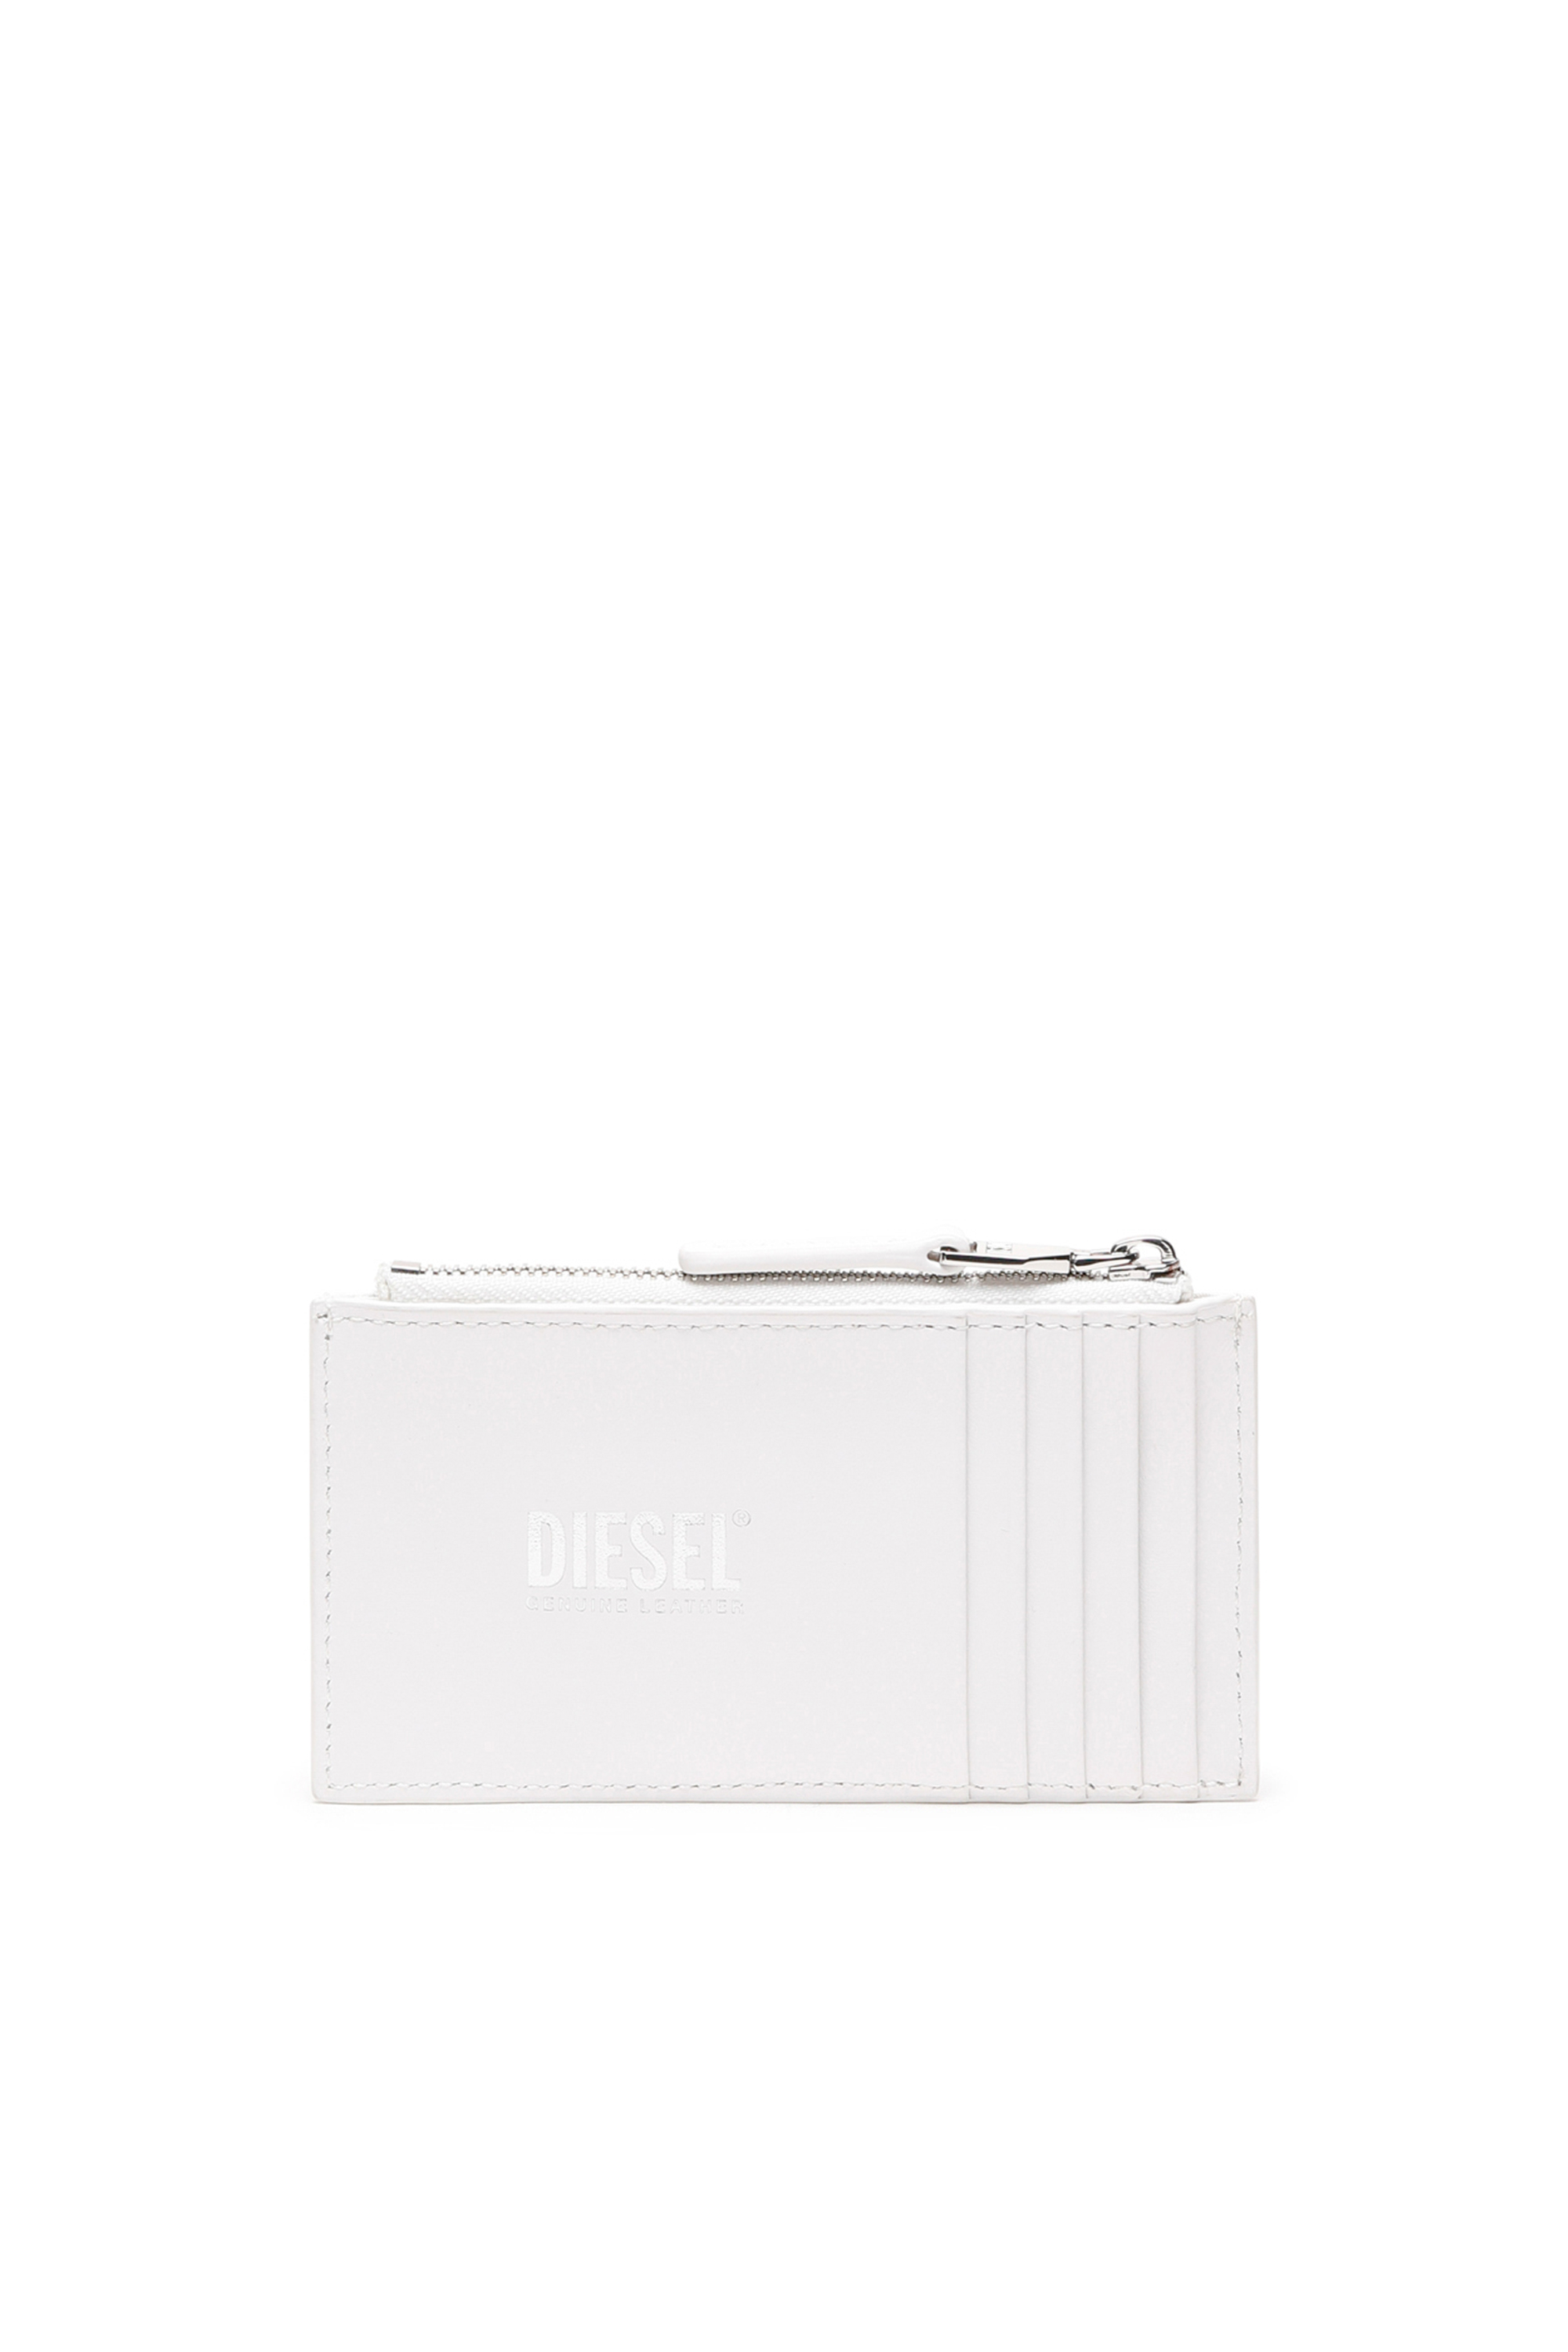 Diesel - PAOULINA, Blanco - Image 2